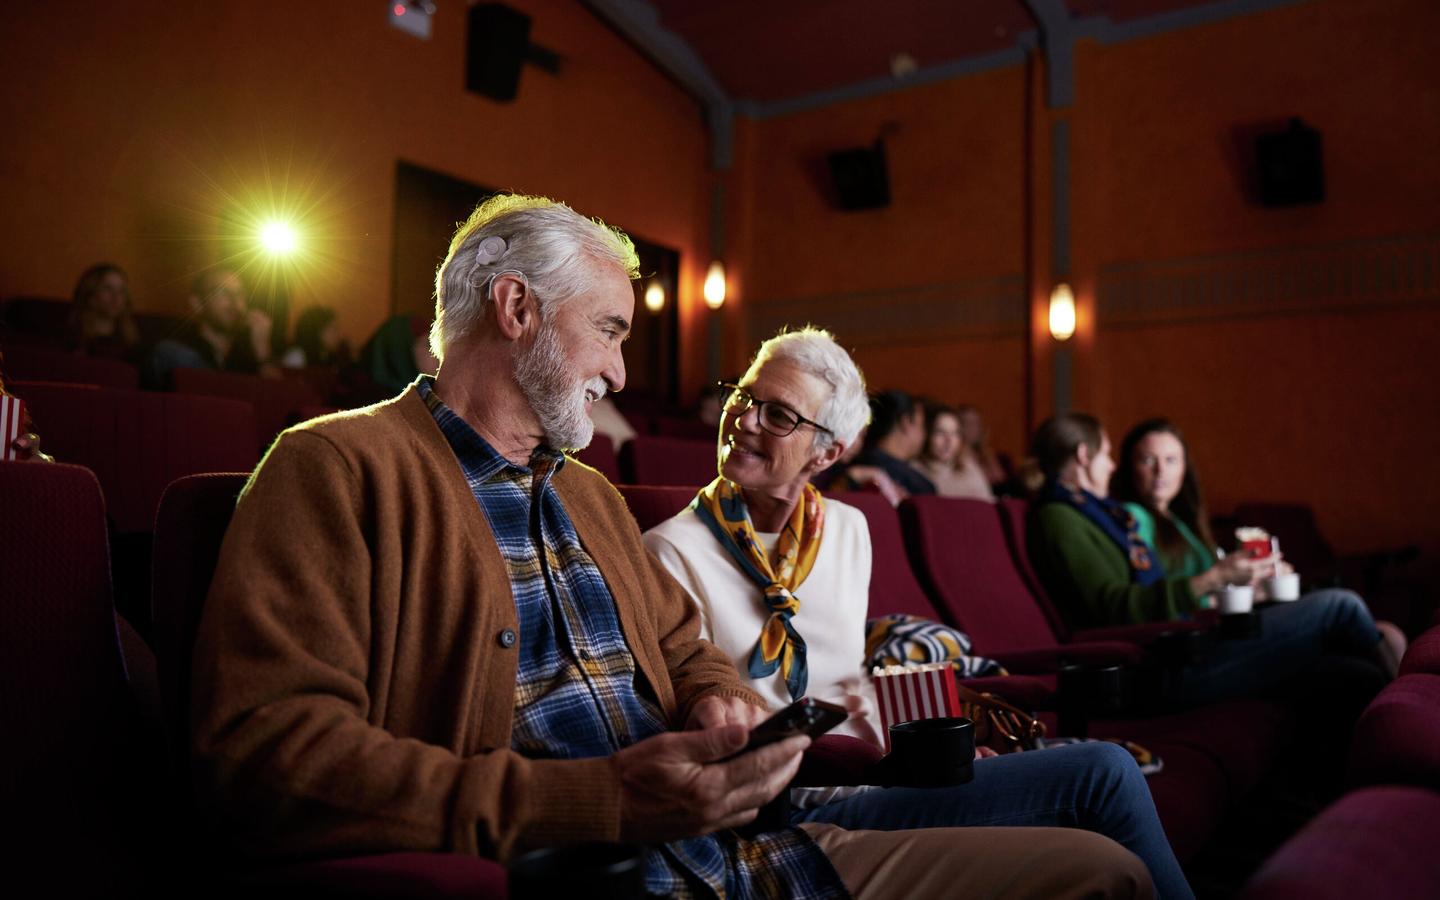 Two elderly people together in a cinema